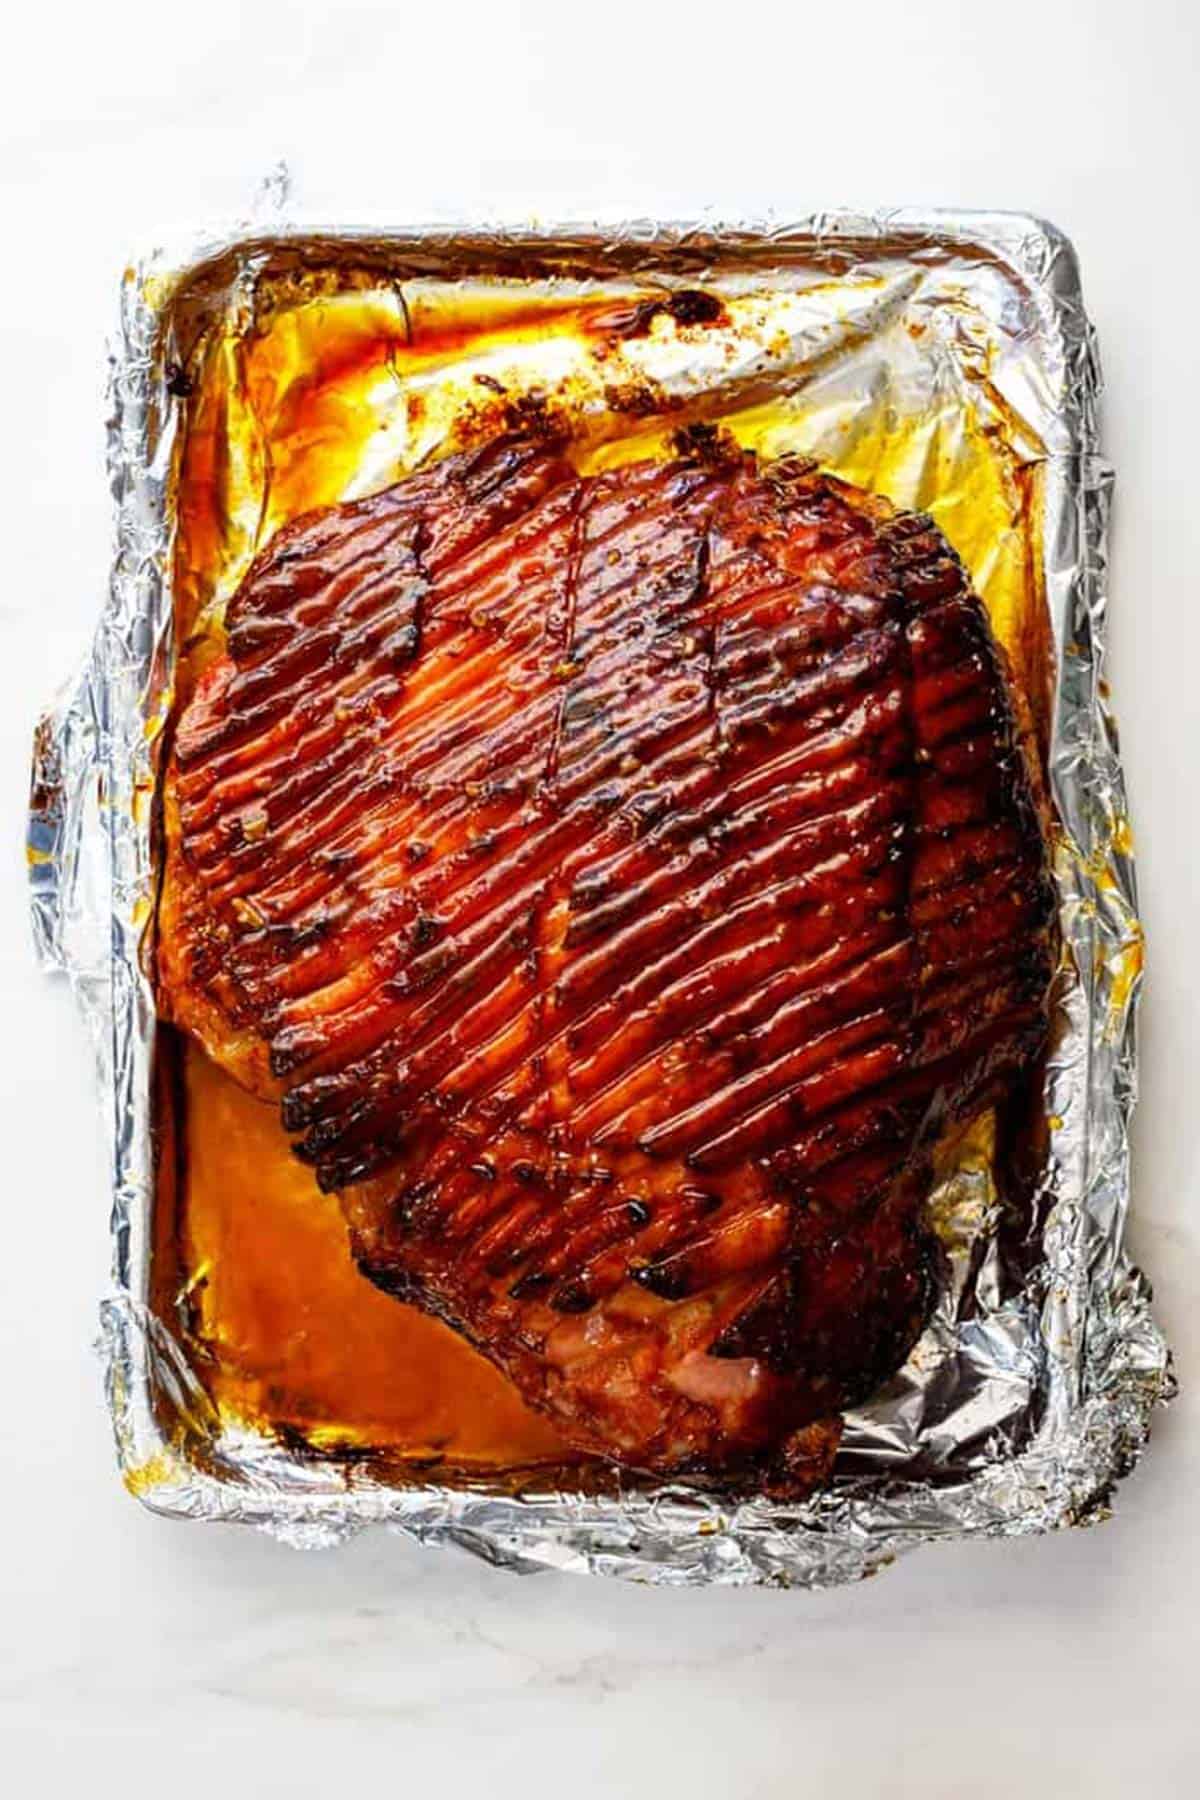 A whole honey baked ham fresh out of the oven with glaze spread everywhere